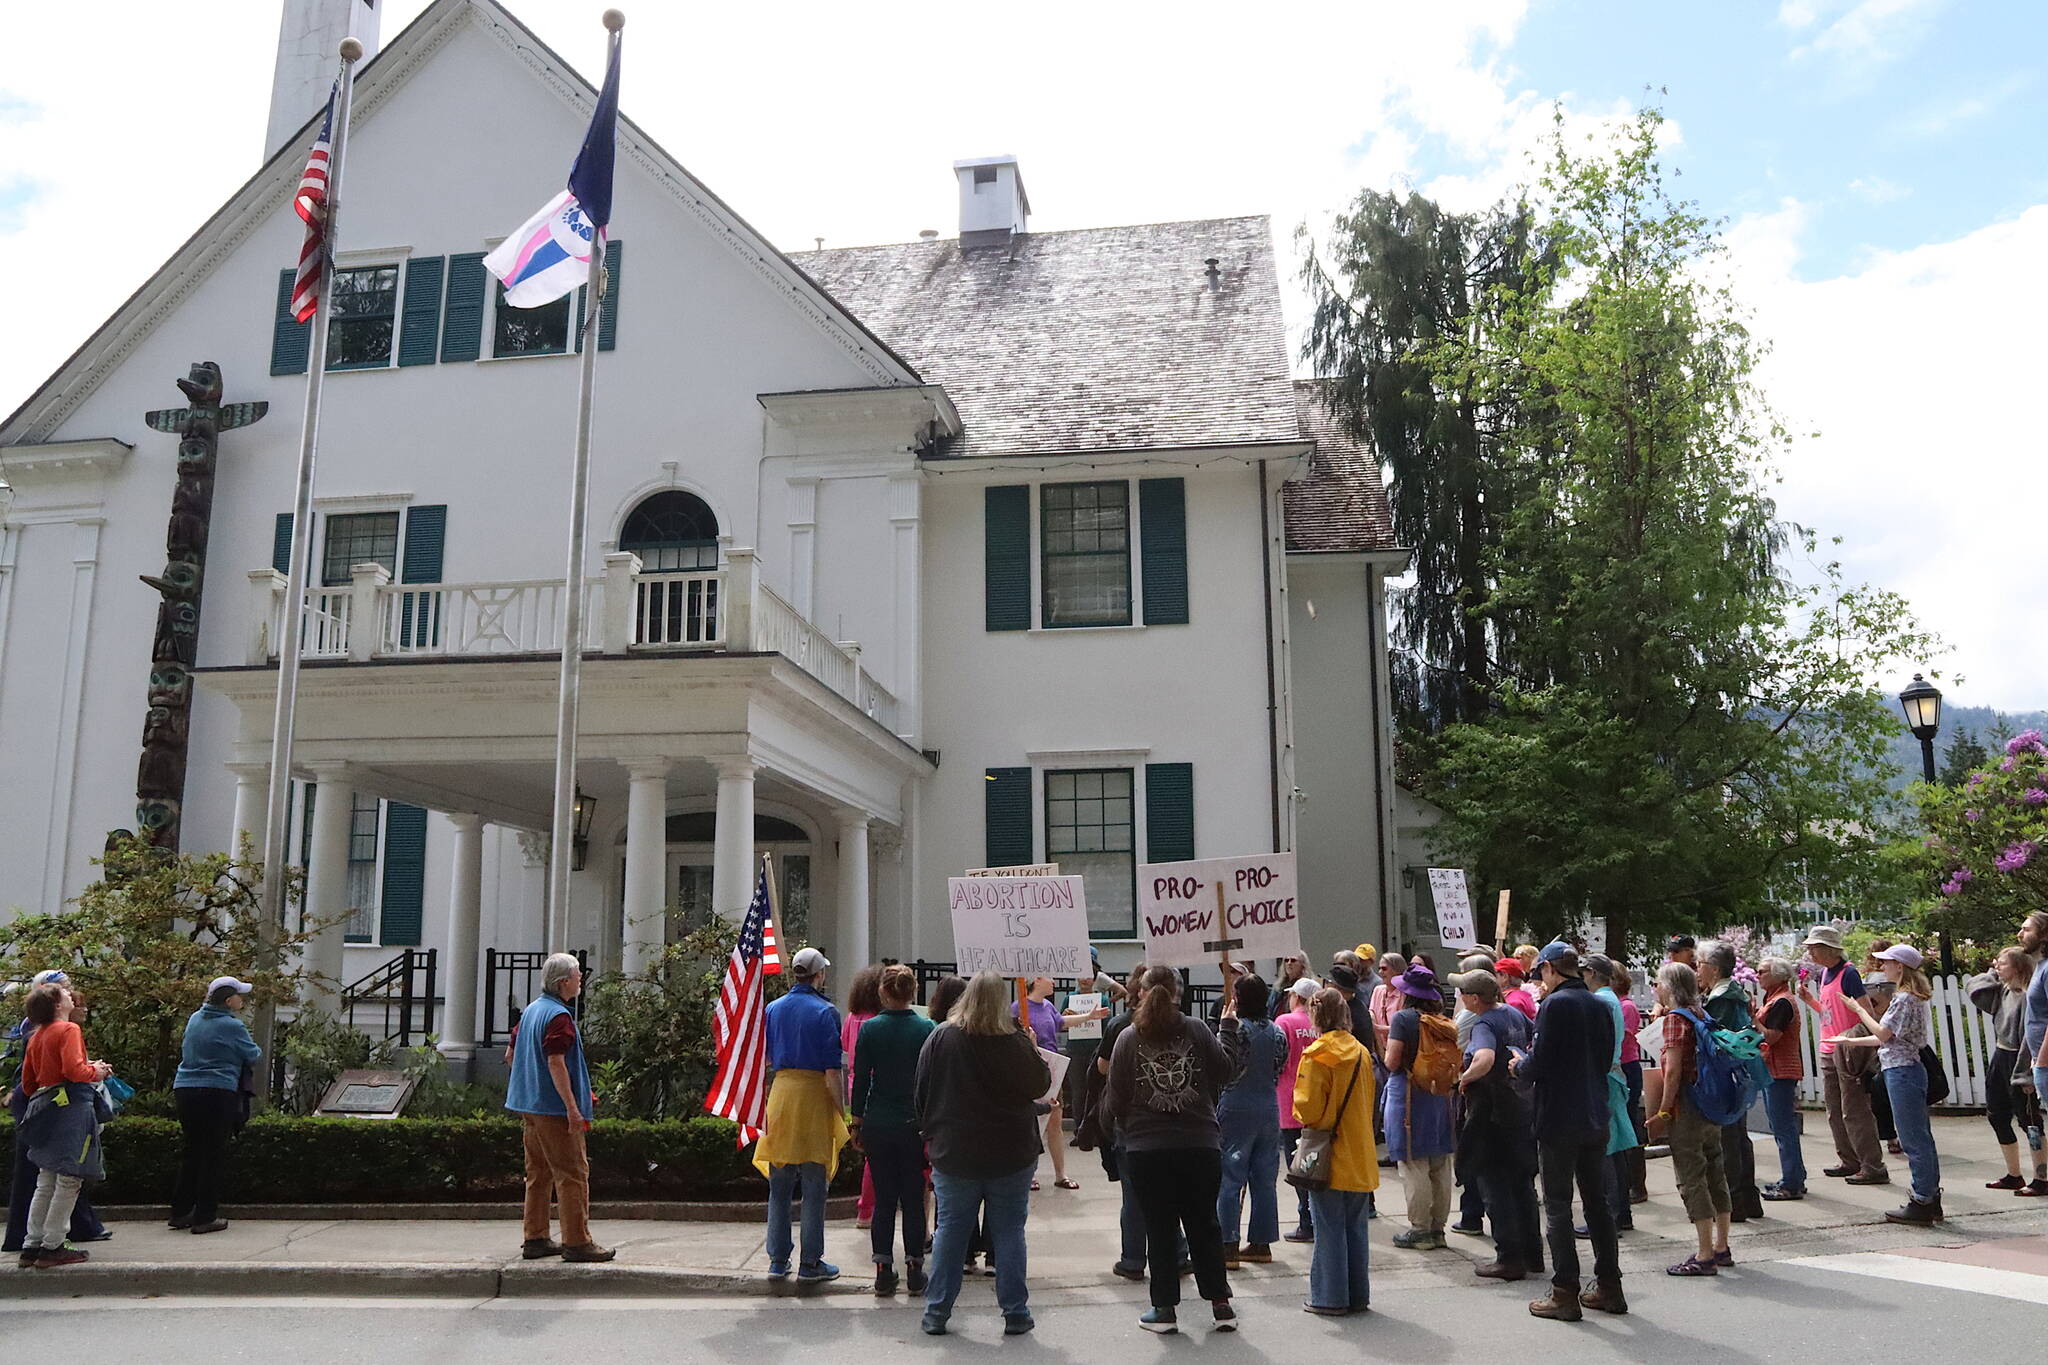 Participants in a pro-choice abortion rally gather outside the Governor’s Residence on Saturday to demand a pro-life flag flying at the entrance be taken down. (Mark Sabbatini / Juneau Empire)